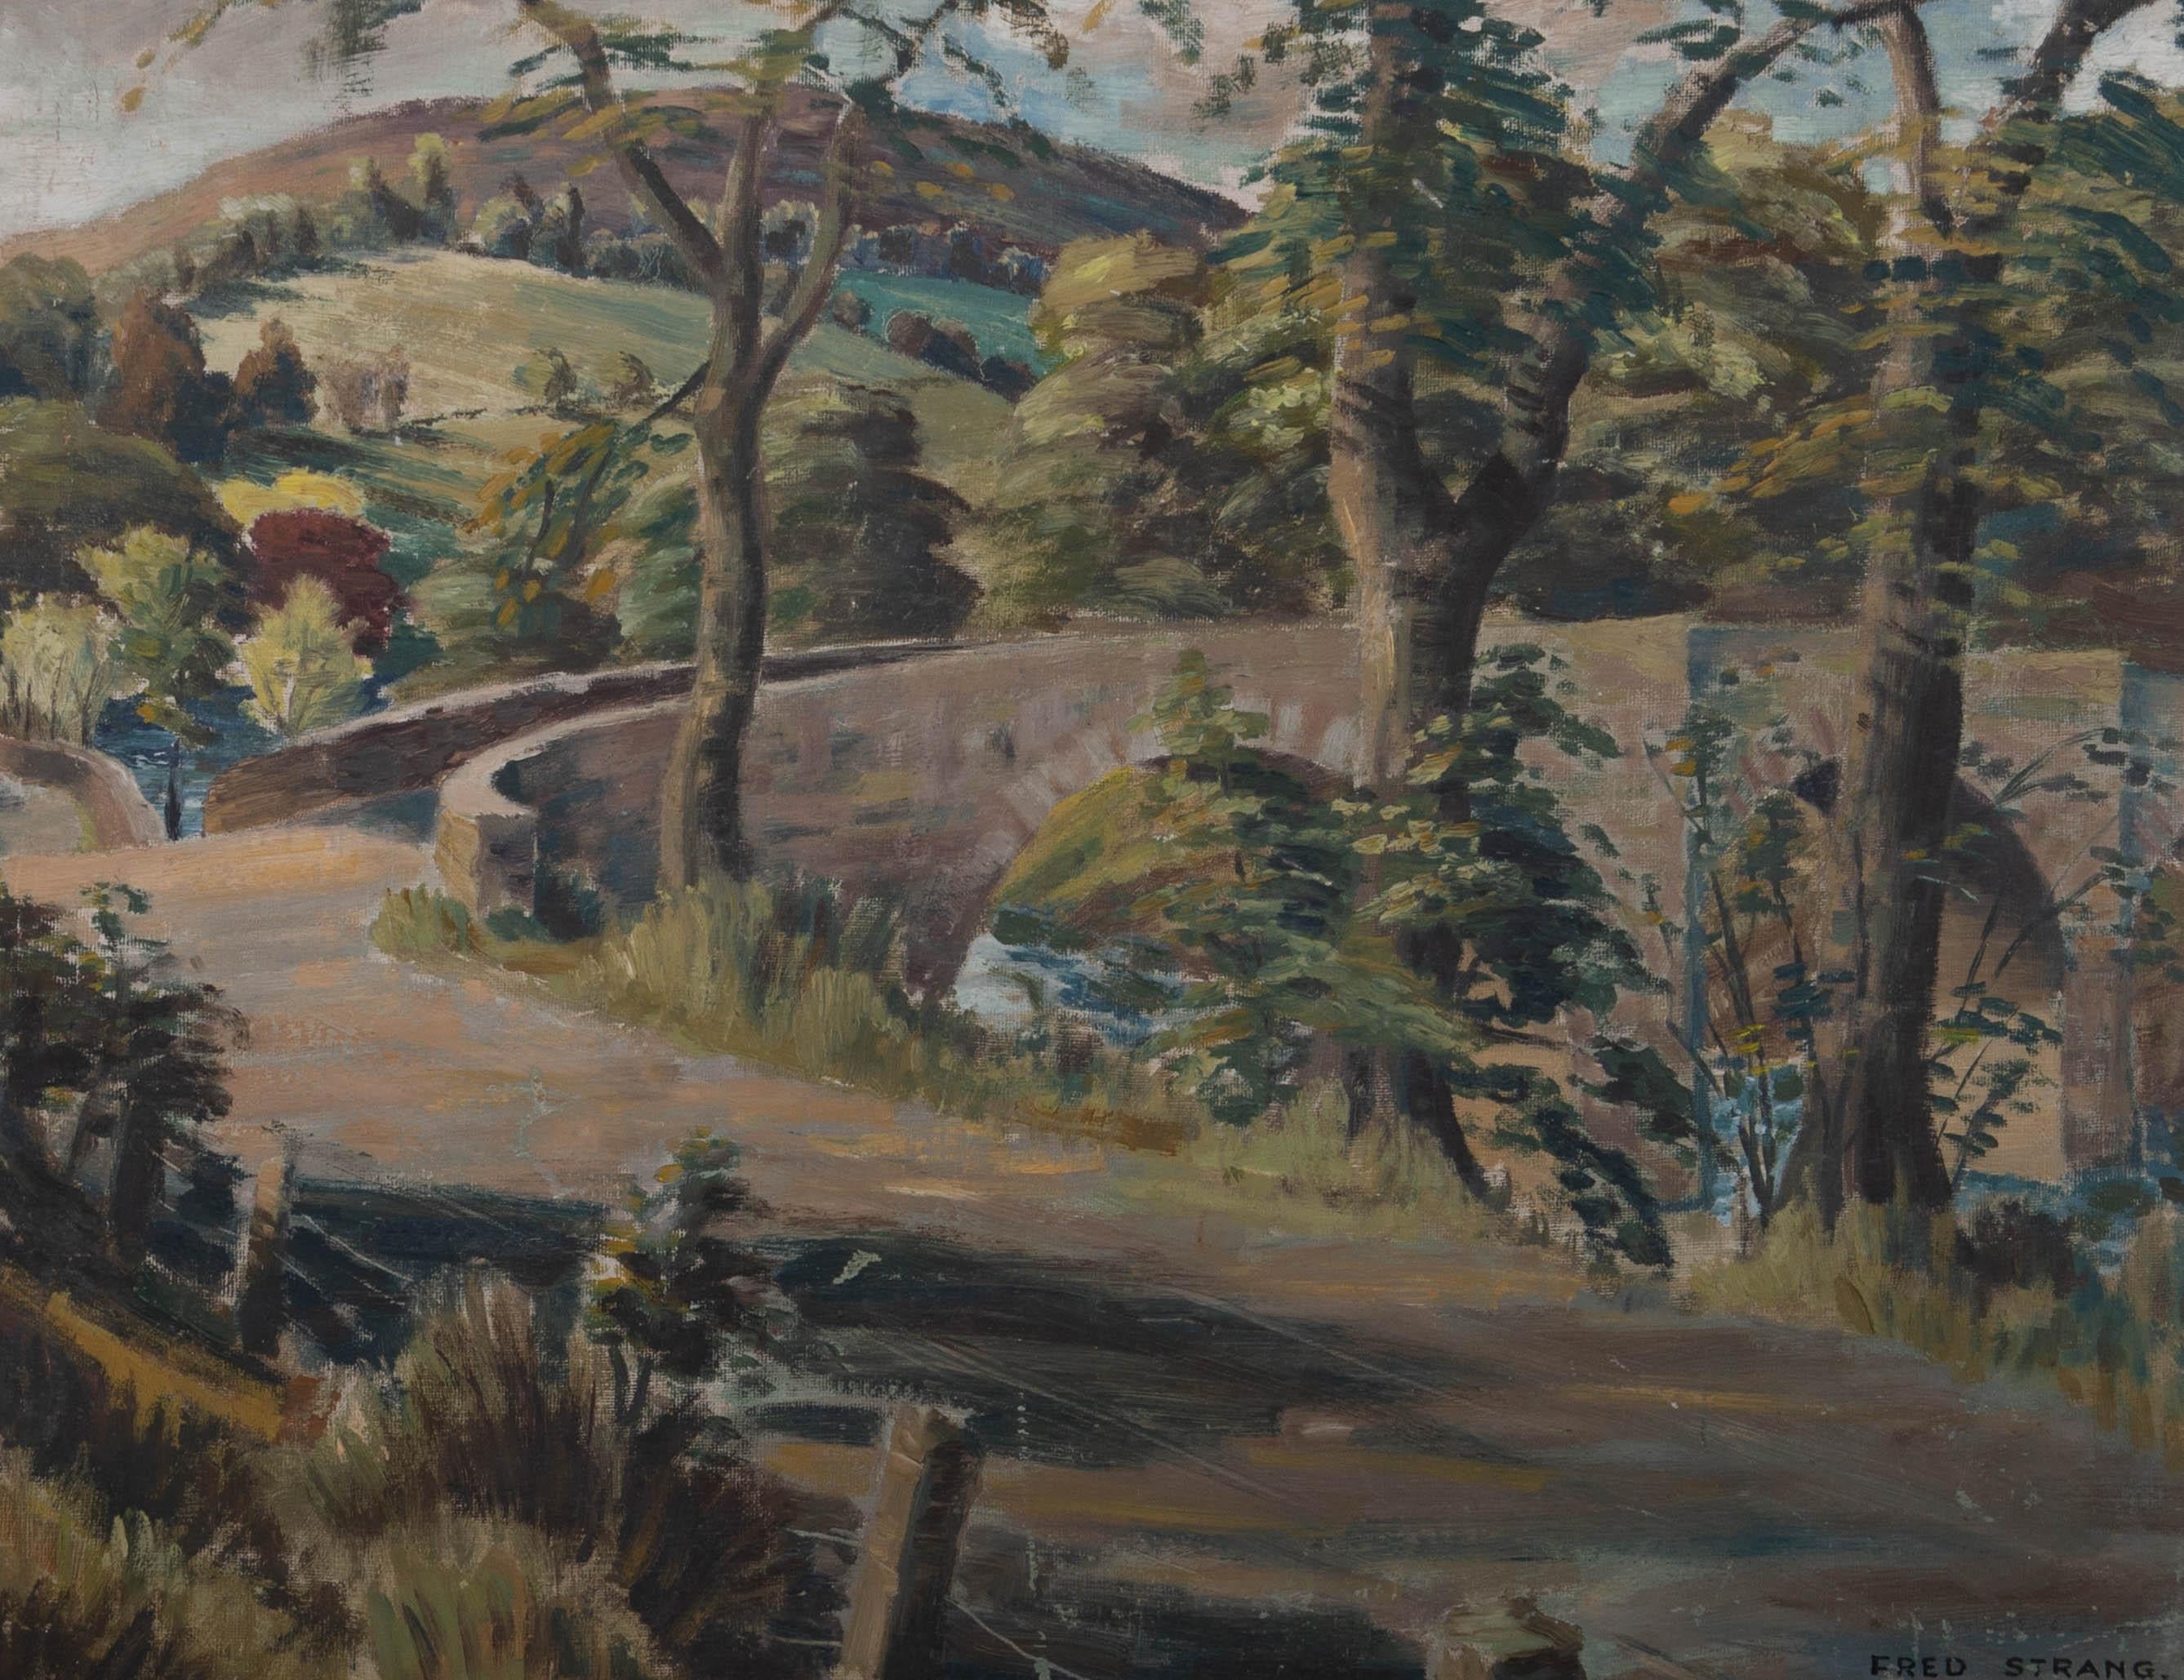 A rustic and rural oil landscape showing the Yair Bridge. The Yair Bridge or Fairnilee Bridge is a bridge across the River Tweed at Yair, near Galashiels in the Scottish Borders. The artist has captured the rolling hills of the Scottish borders